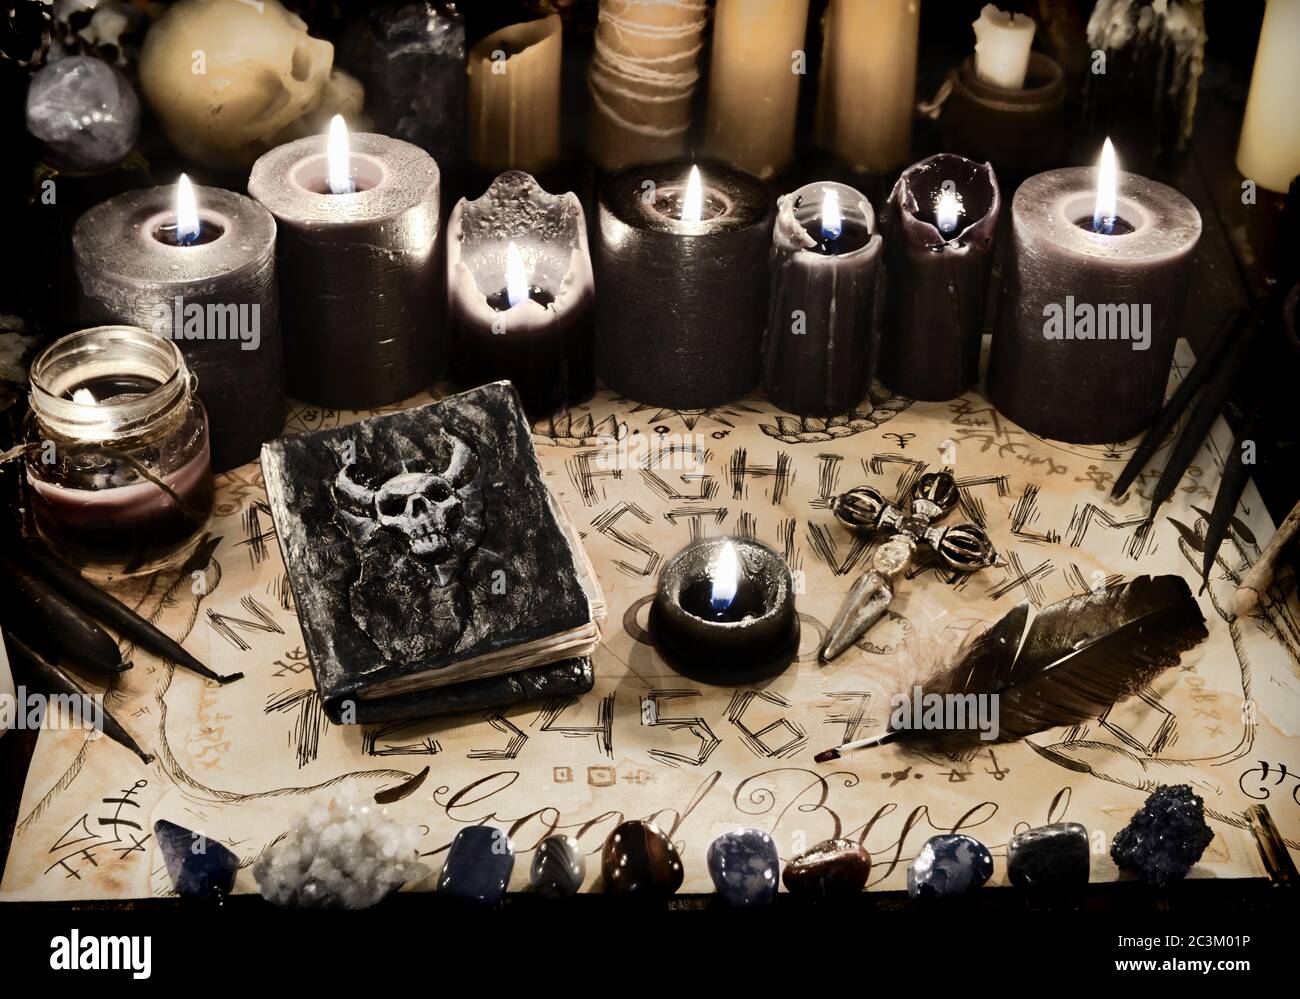 Evil book with black magic spells, candles and ouija board on witch table.  Wicca, esoteric and occult background with vintage magic objects for mystic  Stock Photo - Alamy